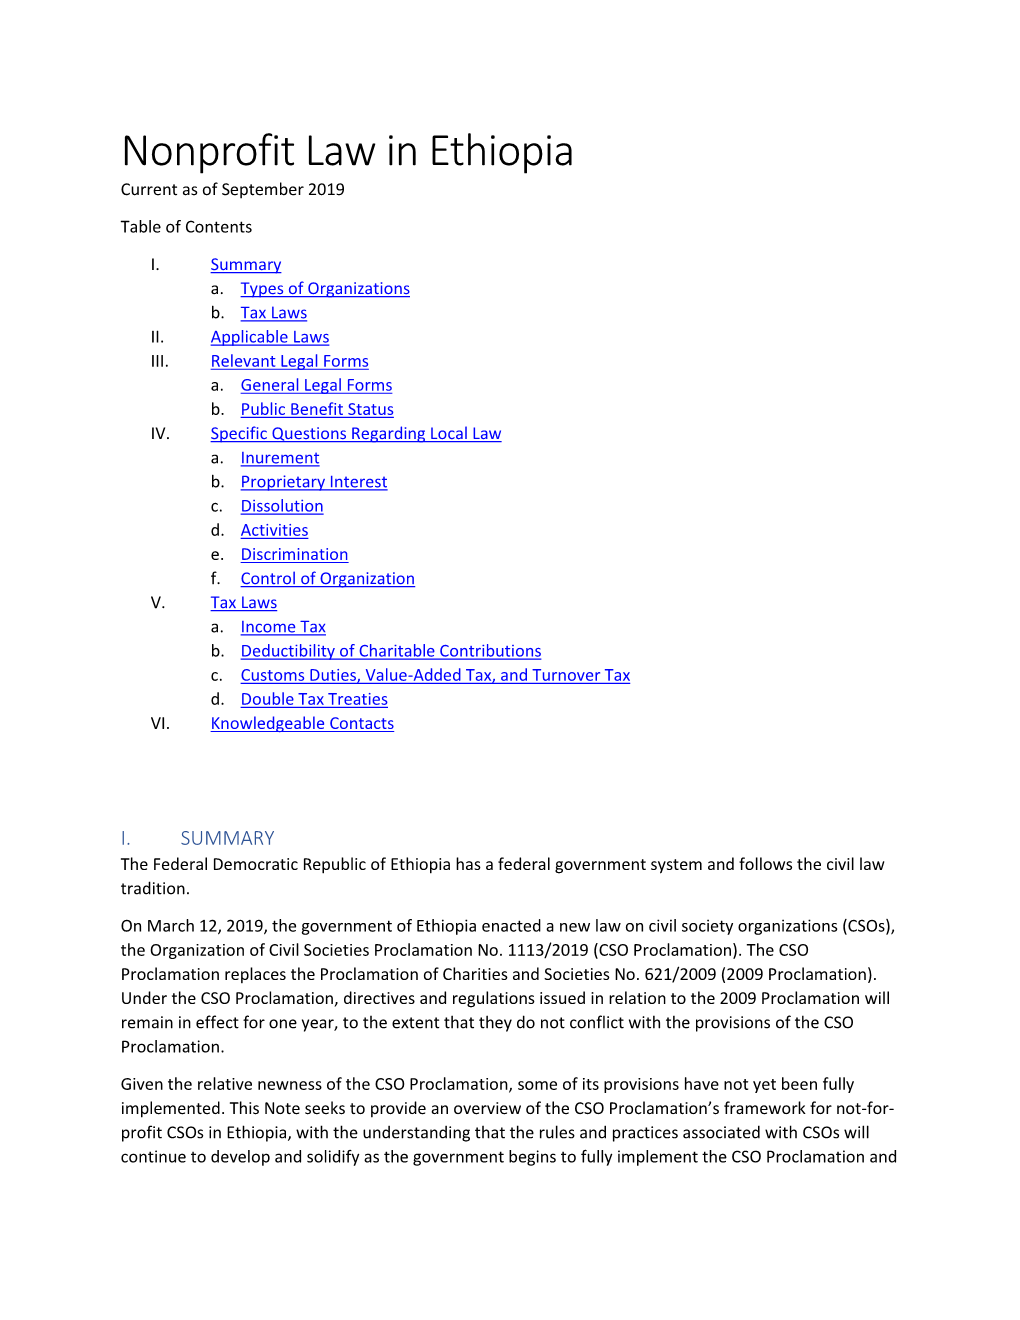 Nonprofit Law in Ethiopia Current As of September 2019